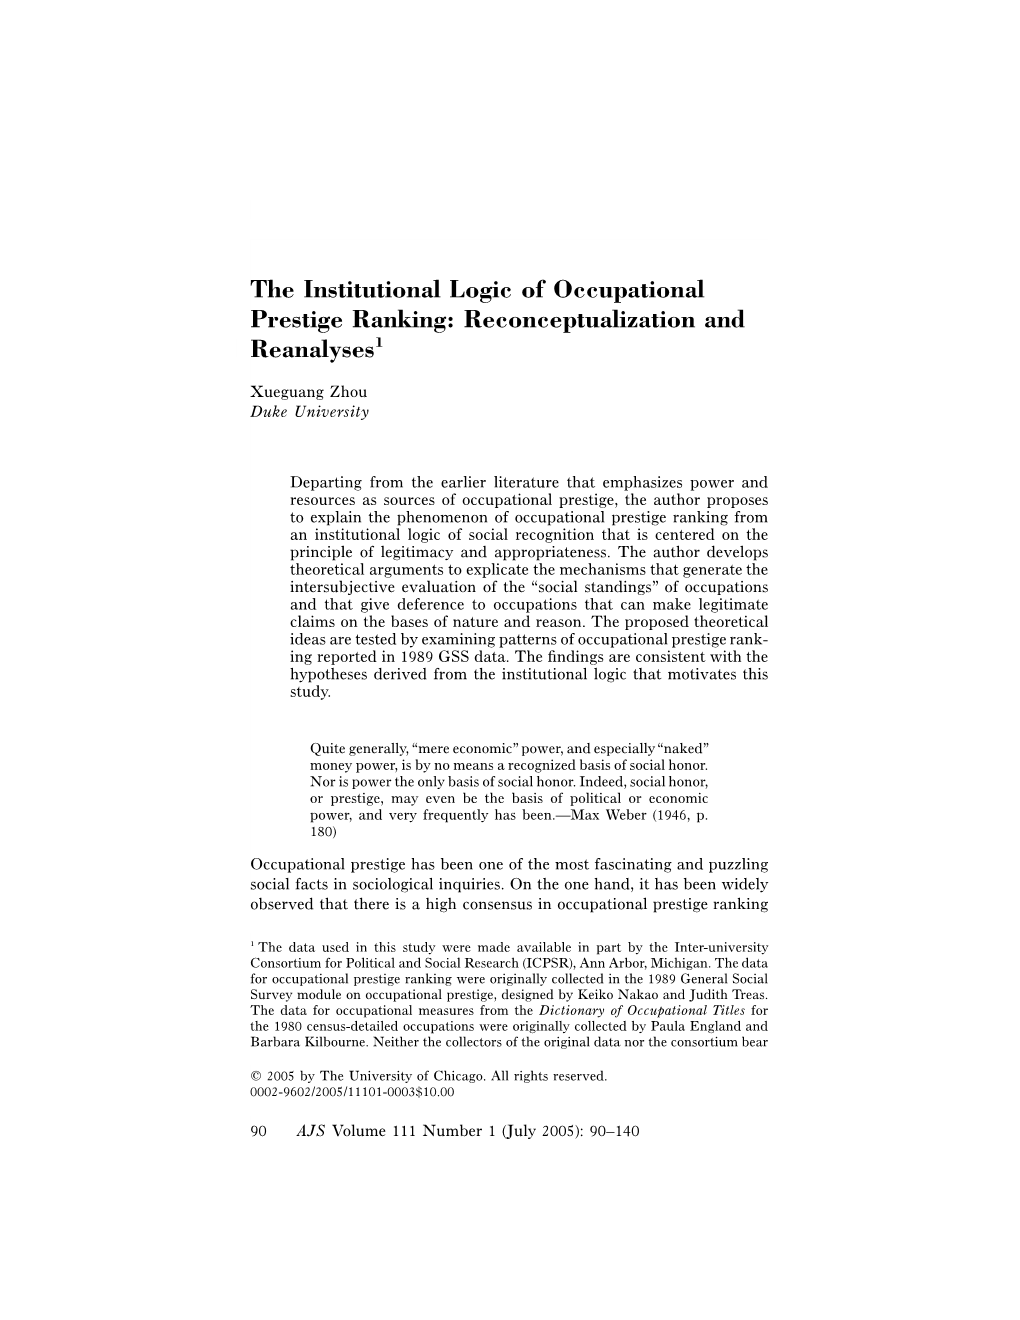 The Institutional Logic of Occupational Prestige Ranking: Reconceptualization and Reanalyses1